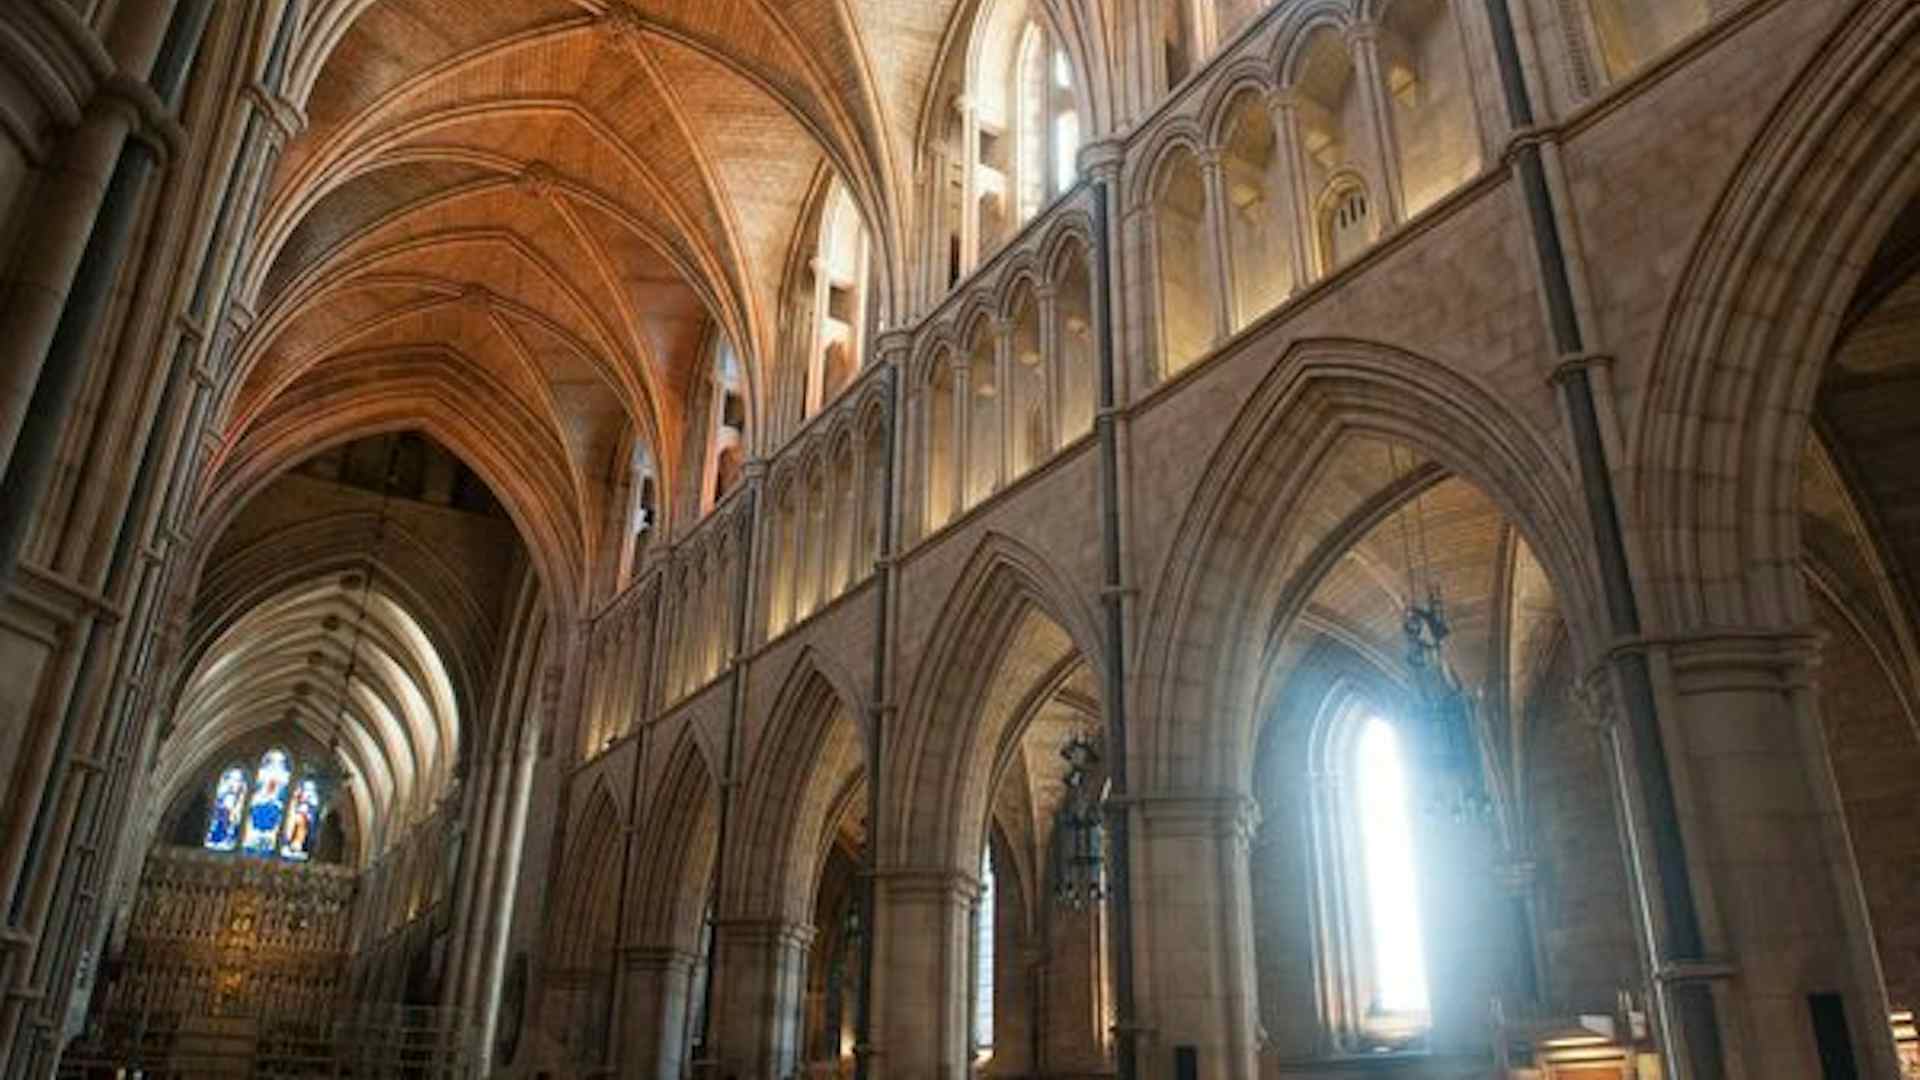 Southwark Cathedral: a Historical & Architectural Wonder